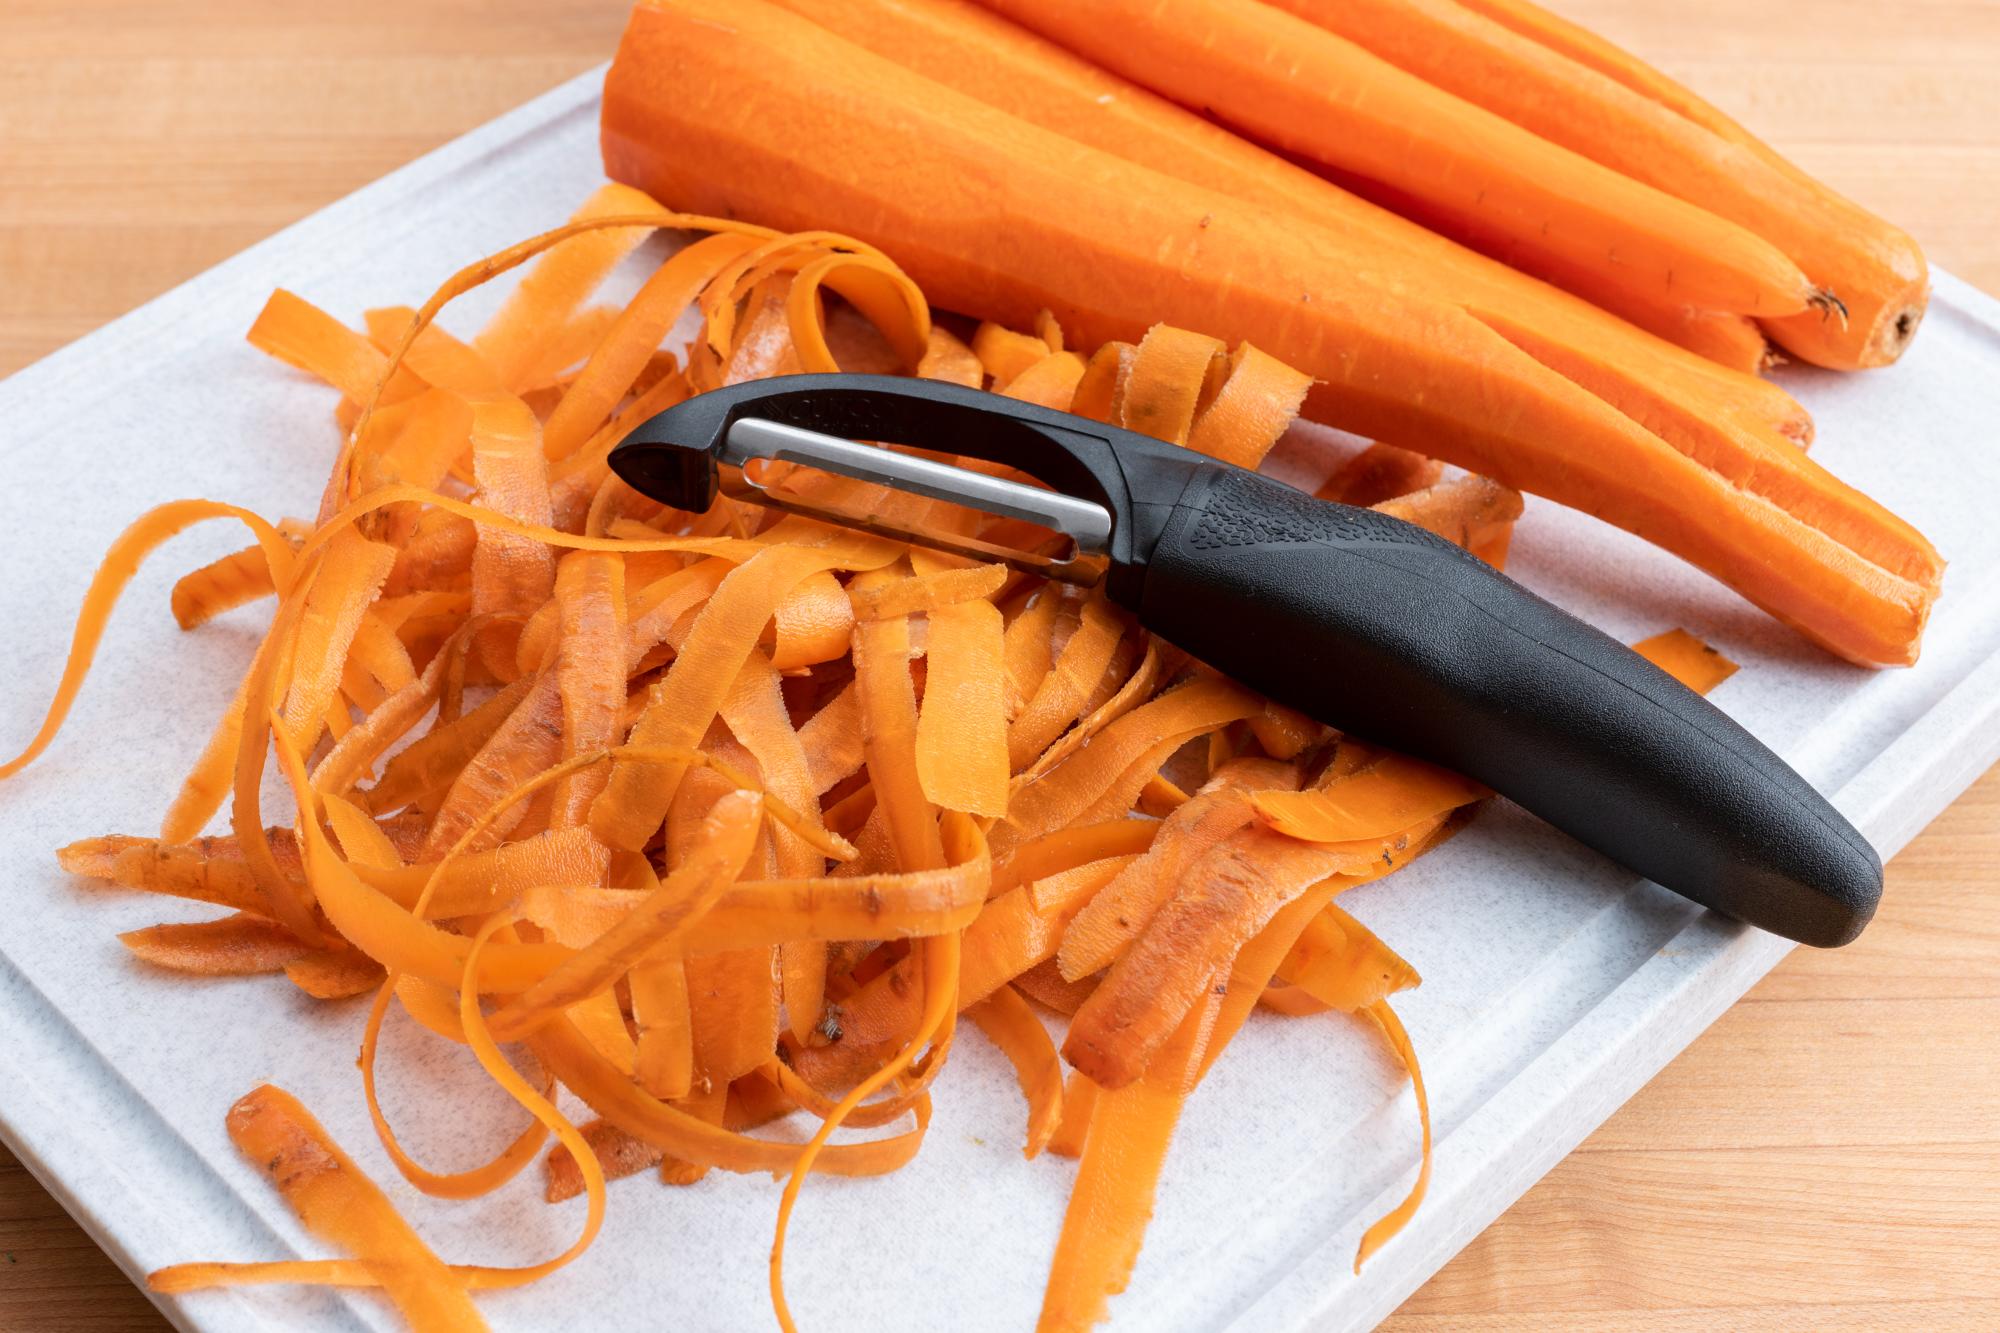 quickly peel the carrots with the Cutco Vegetable Peeler.